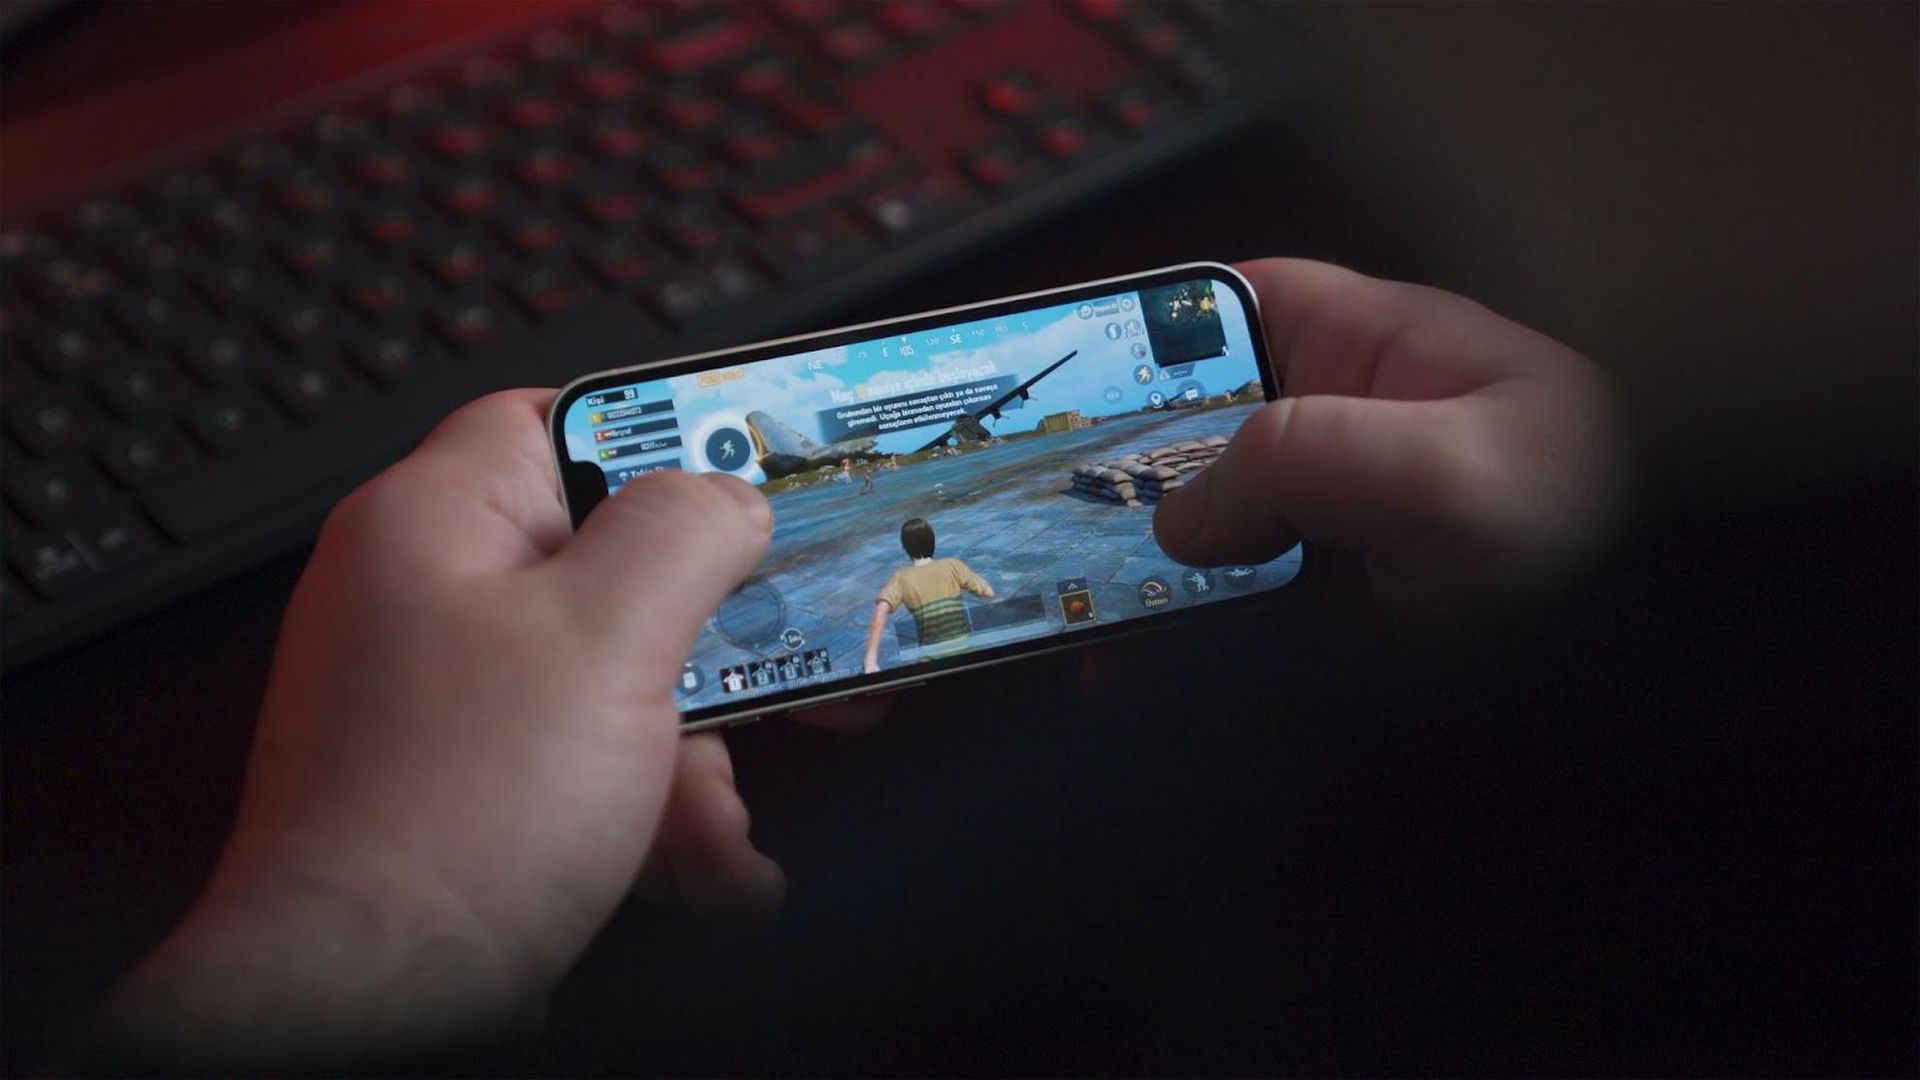 User engagement and retention: Best practices for iOS game development